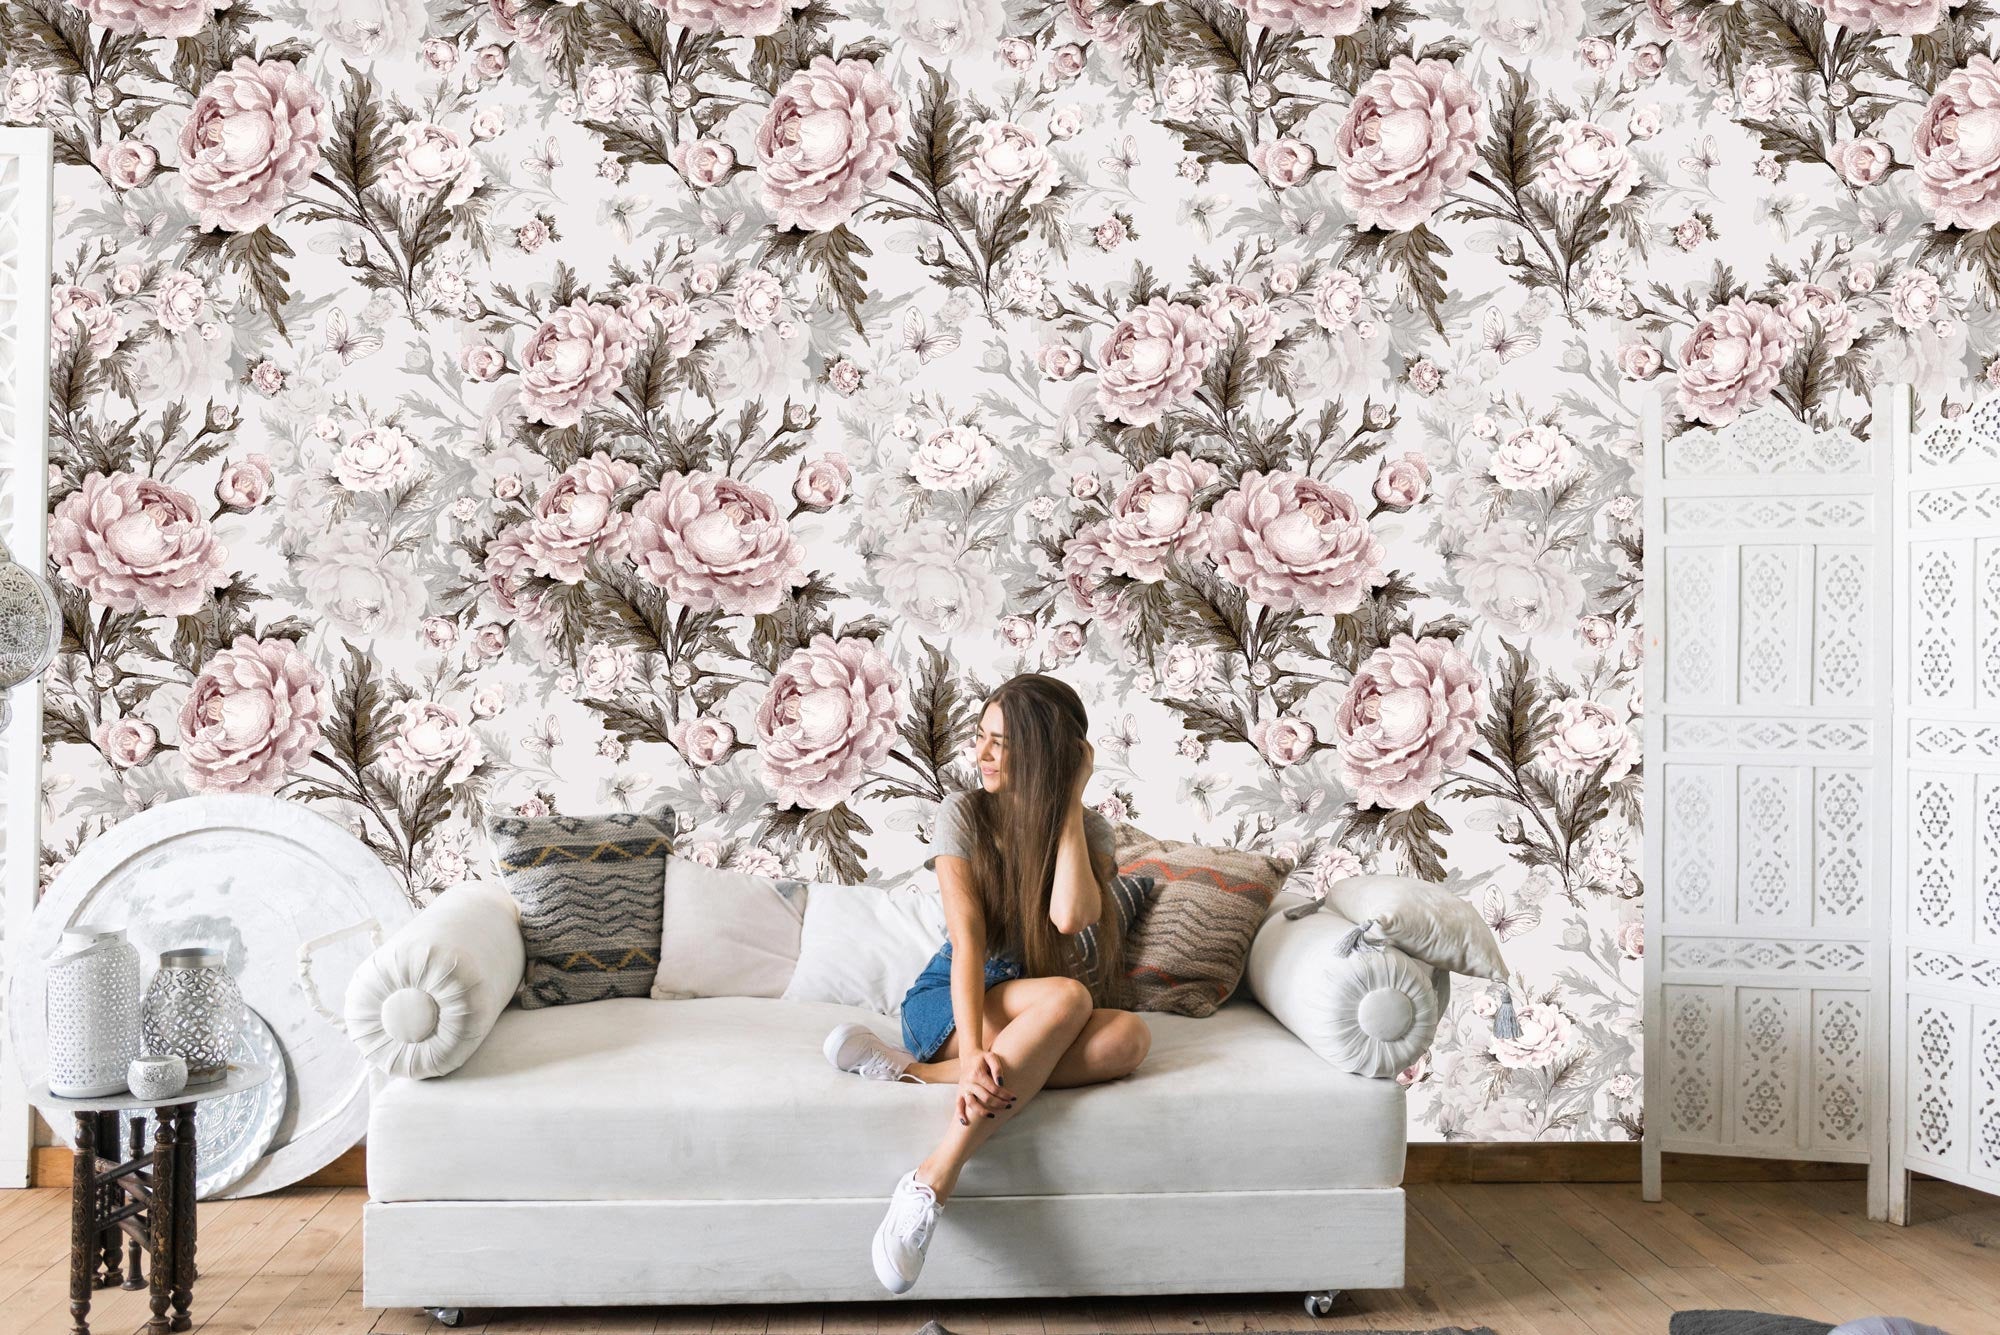 Minimalist White Butterflies And Roses Floral Wallpaper